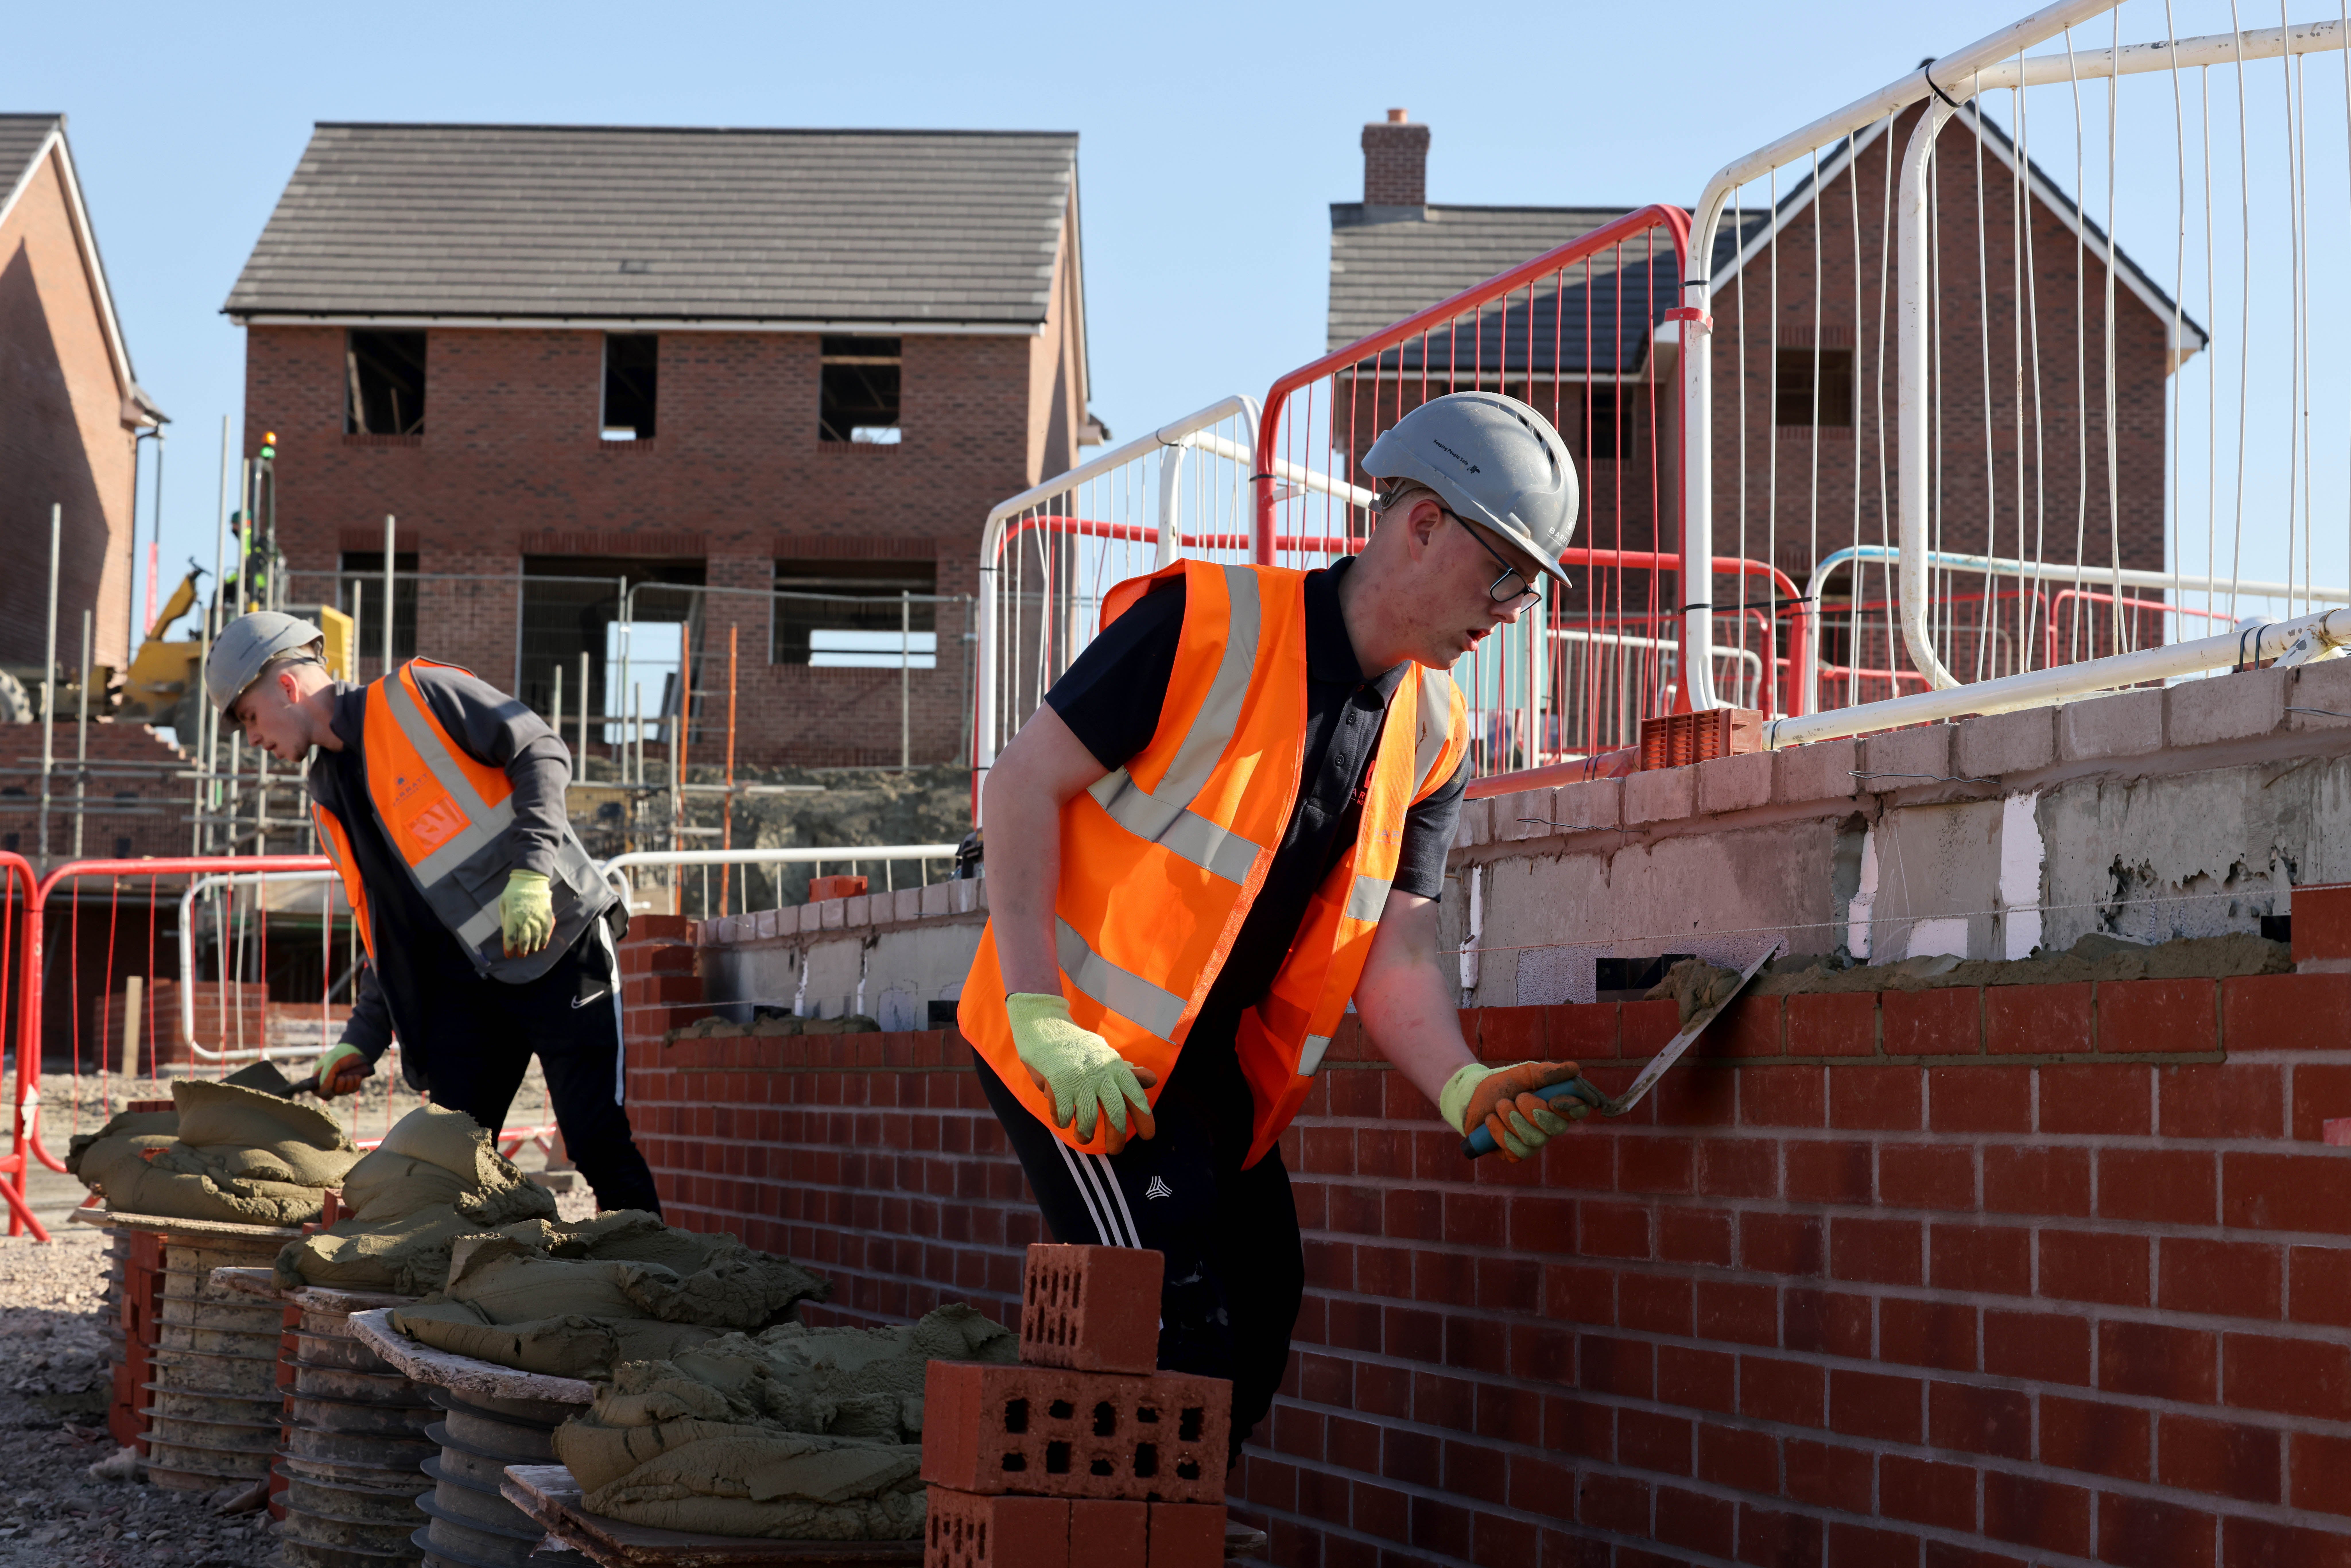 Housebuilder Barratt Developments has revealed it is facing a rise in build costs of up to 10% as soaring energy prices and inflation take their toll (Jonathan Buckmaster/Daily Express/PA)